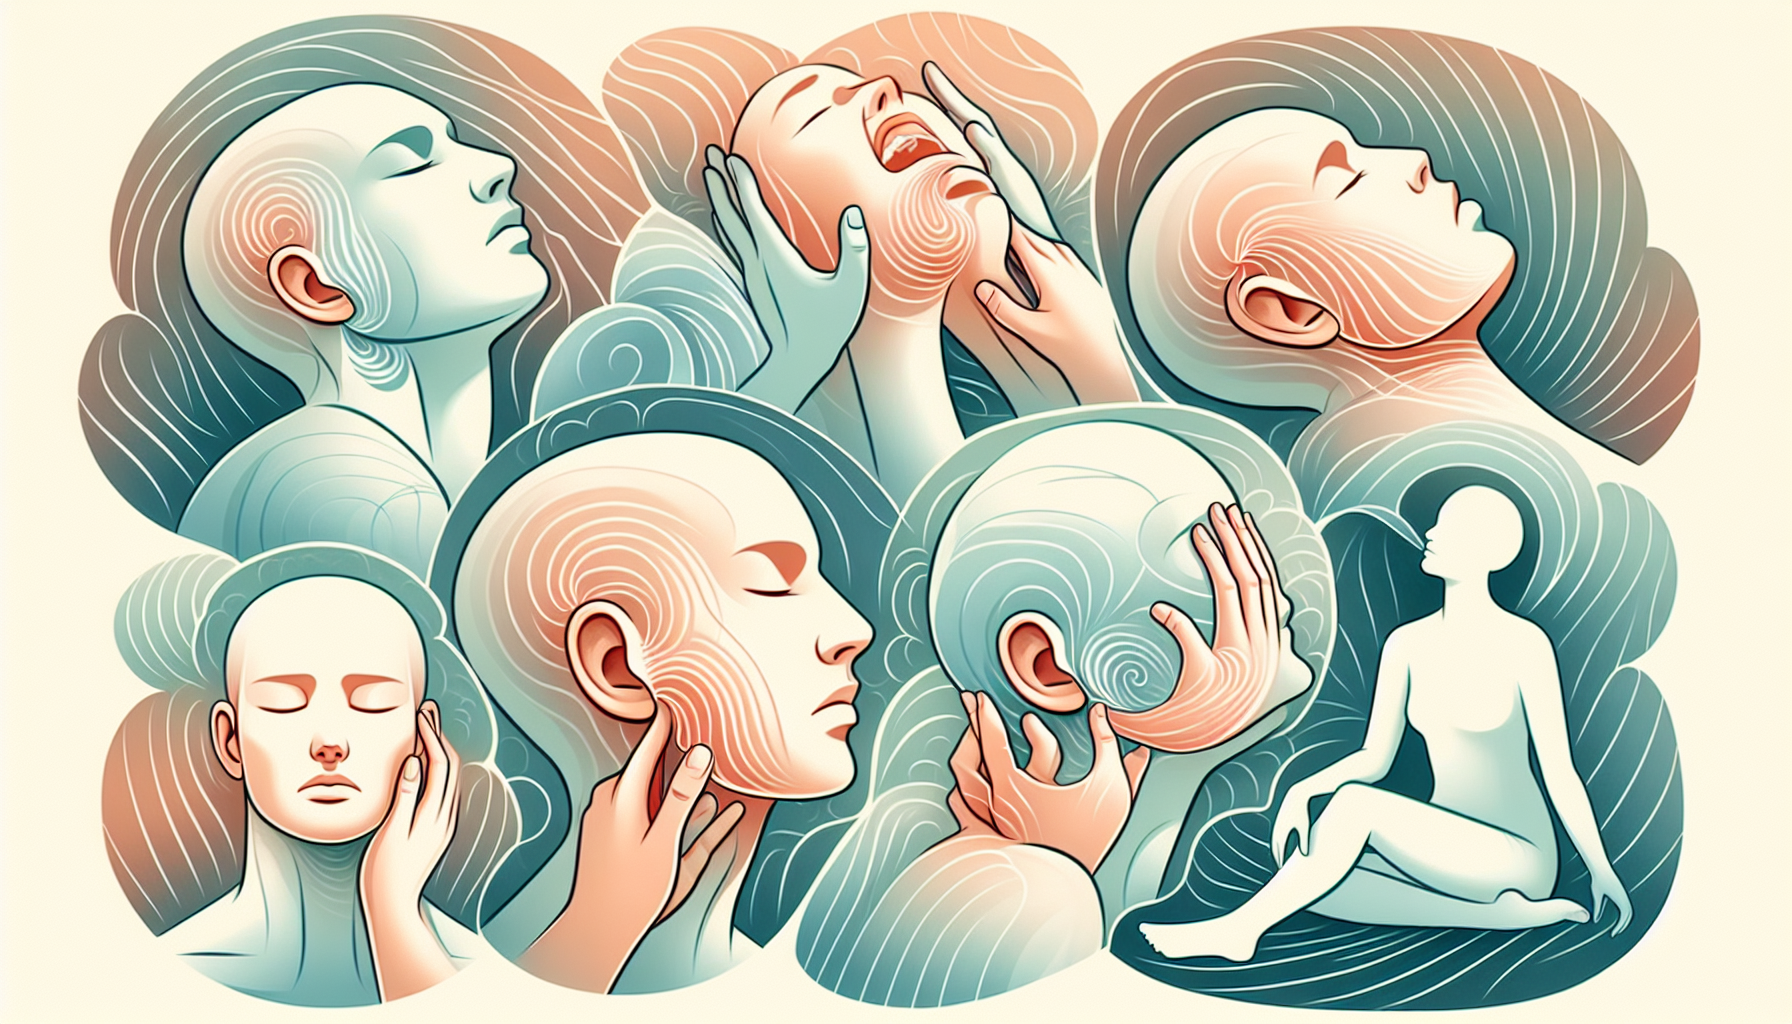 Illustration of jaw exercises and relaxation techniques